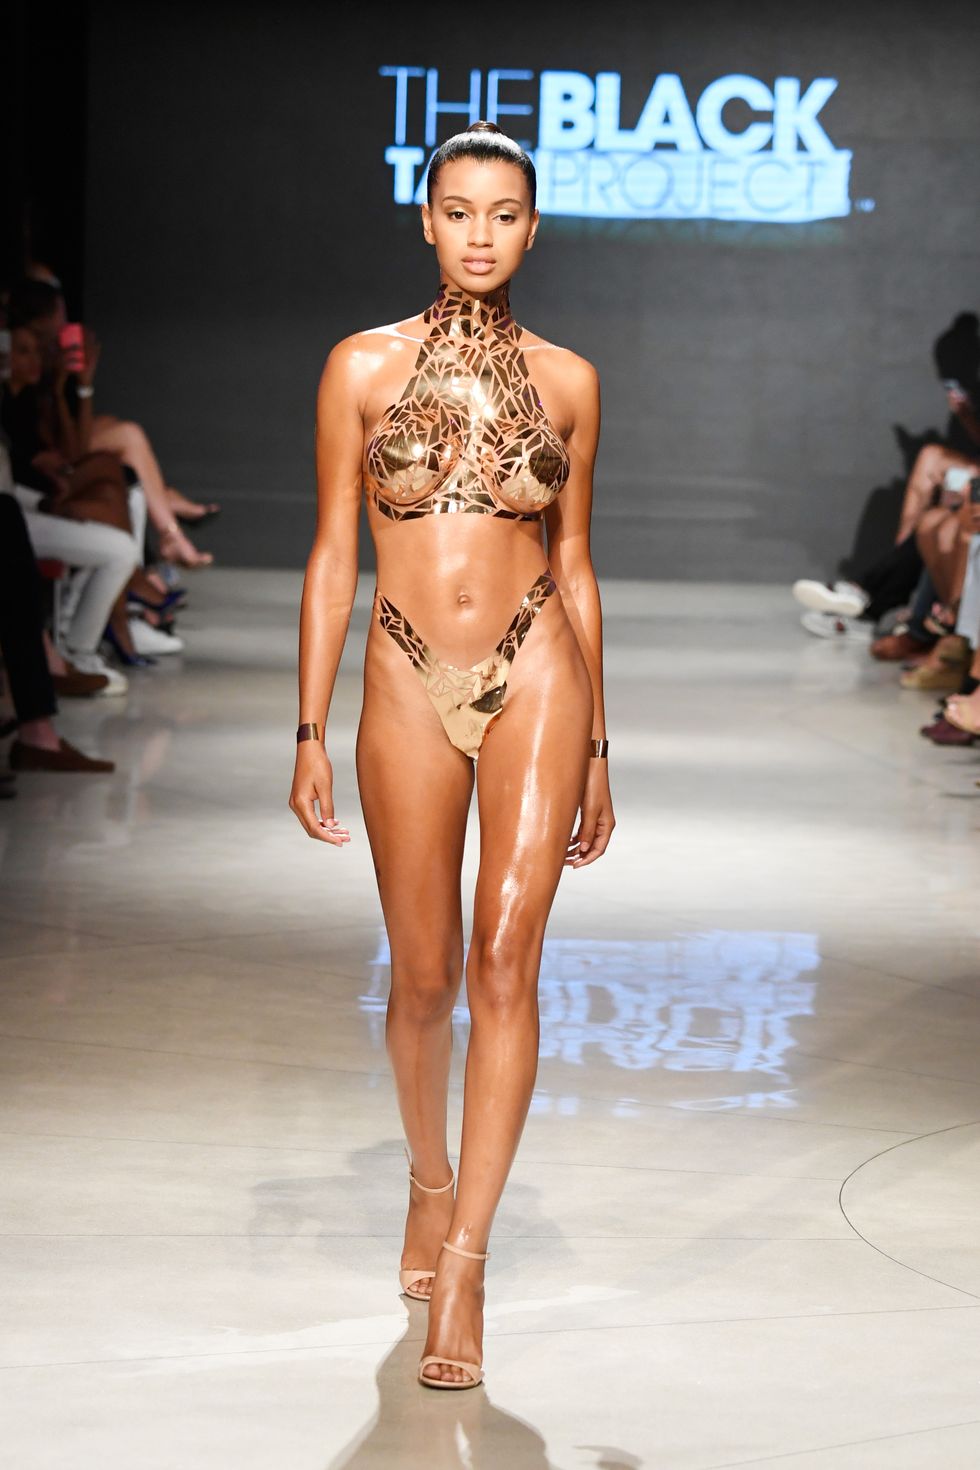 980px x 1470px - Nearly Naked Metallic Tape Swimsuits Exist - All About the Black Tape  Project Maimi Swim Week Show